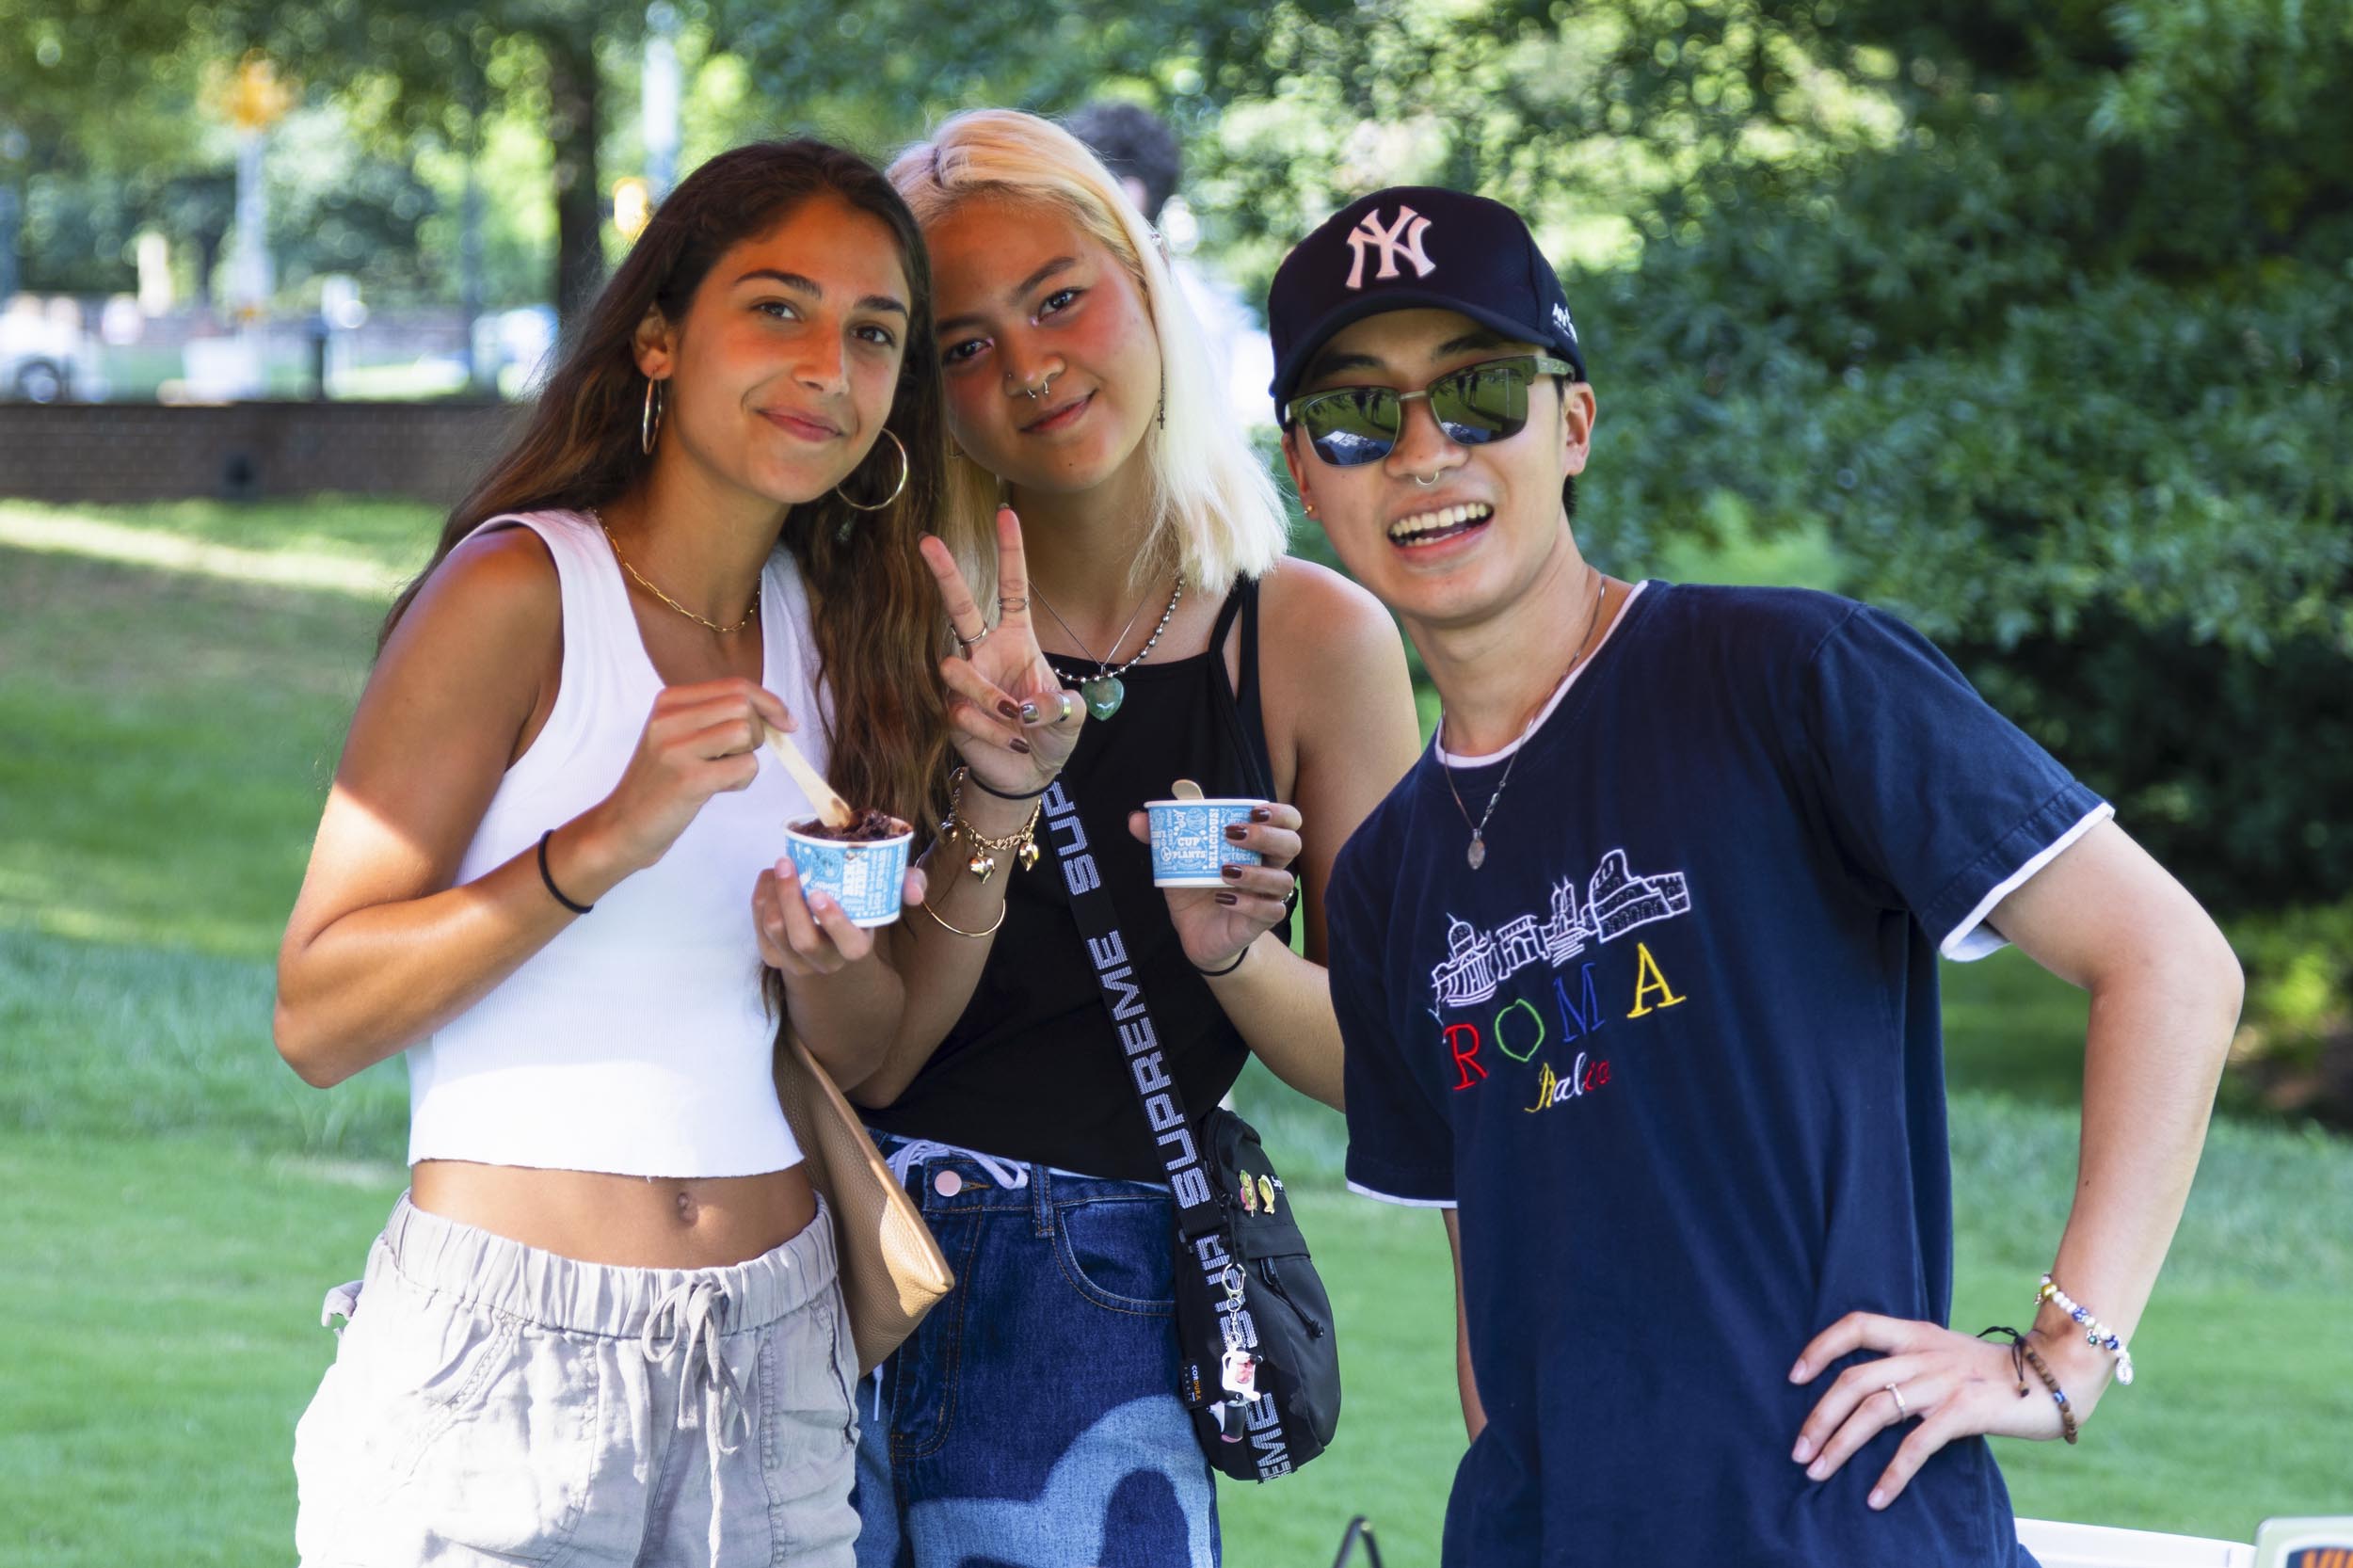 3 students pose together while they hold their icecream